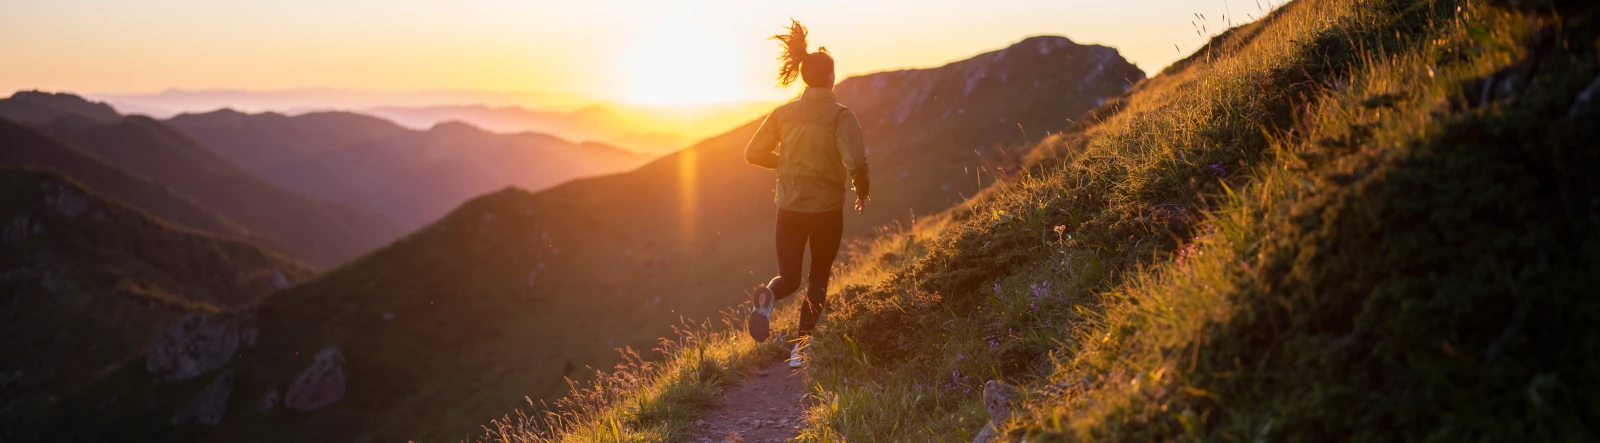 A woman running over hilly terrain in the sunset